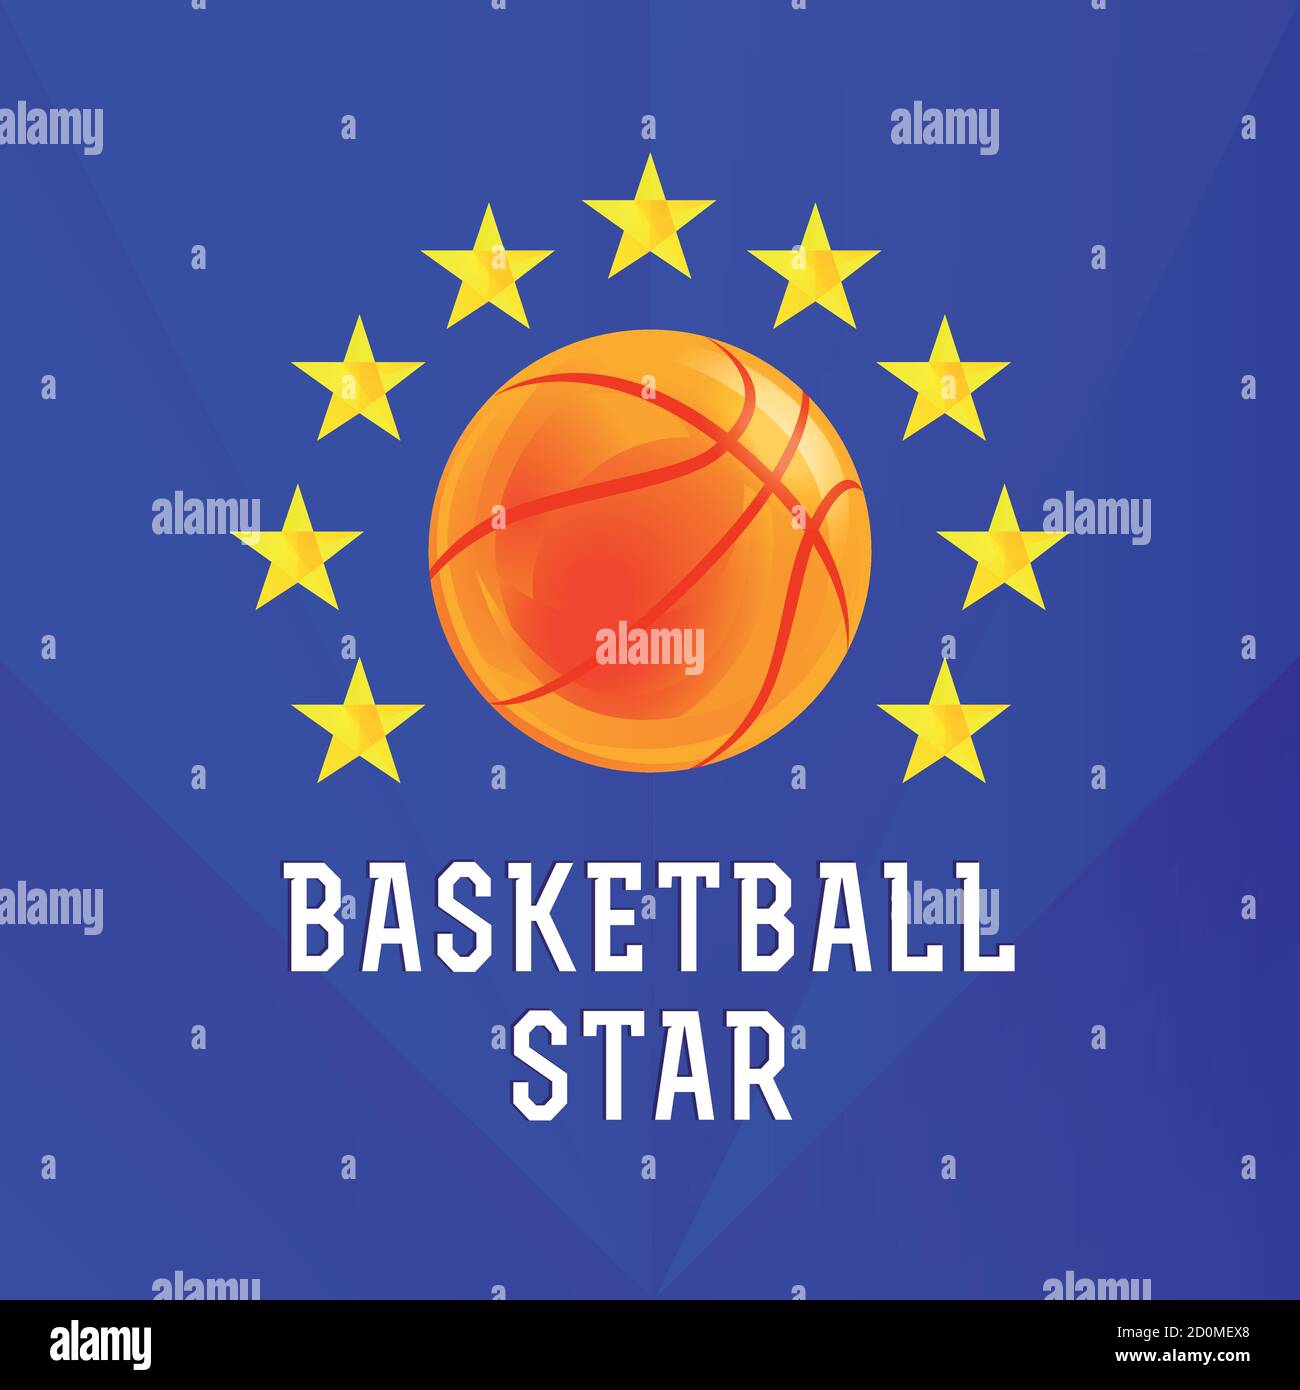 Basketball vector logo. Ball, stars, golden sign. Brand symbol of national competitions, mobile app, sport equipment shop. Creative award red icon. Stock Vector